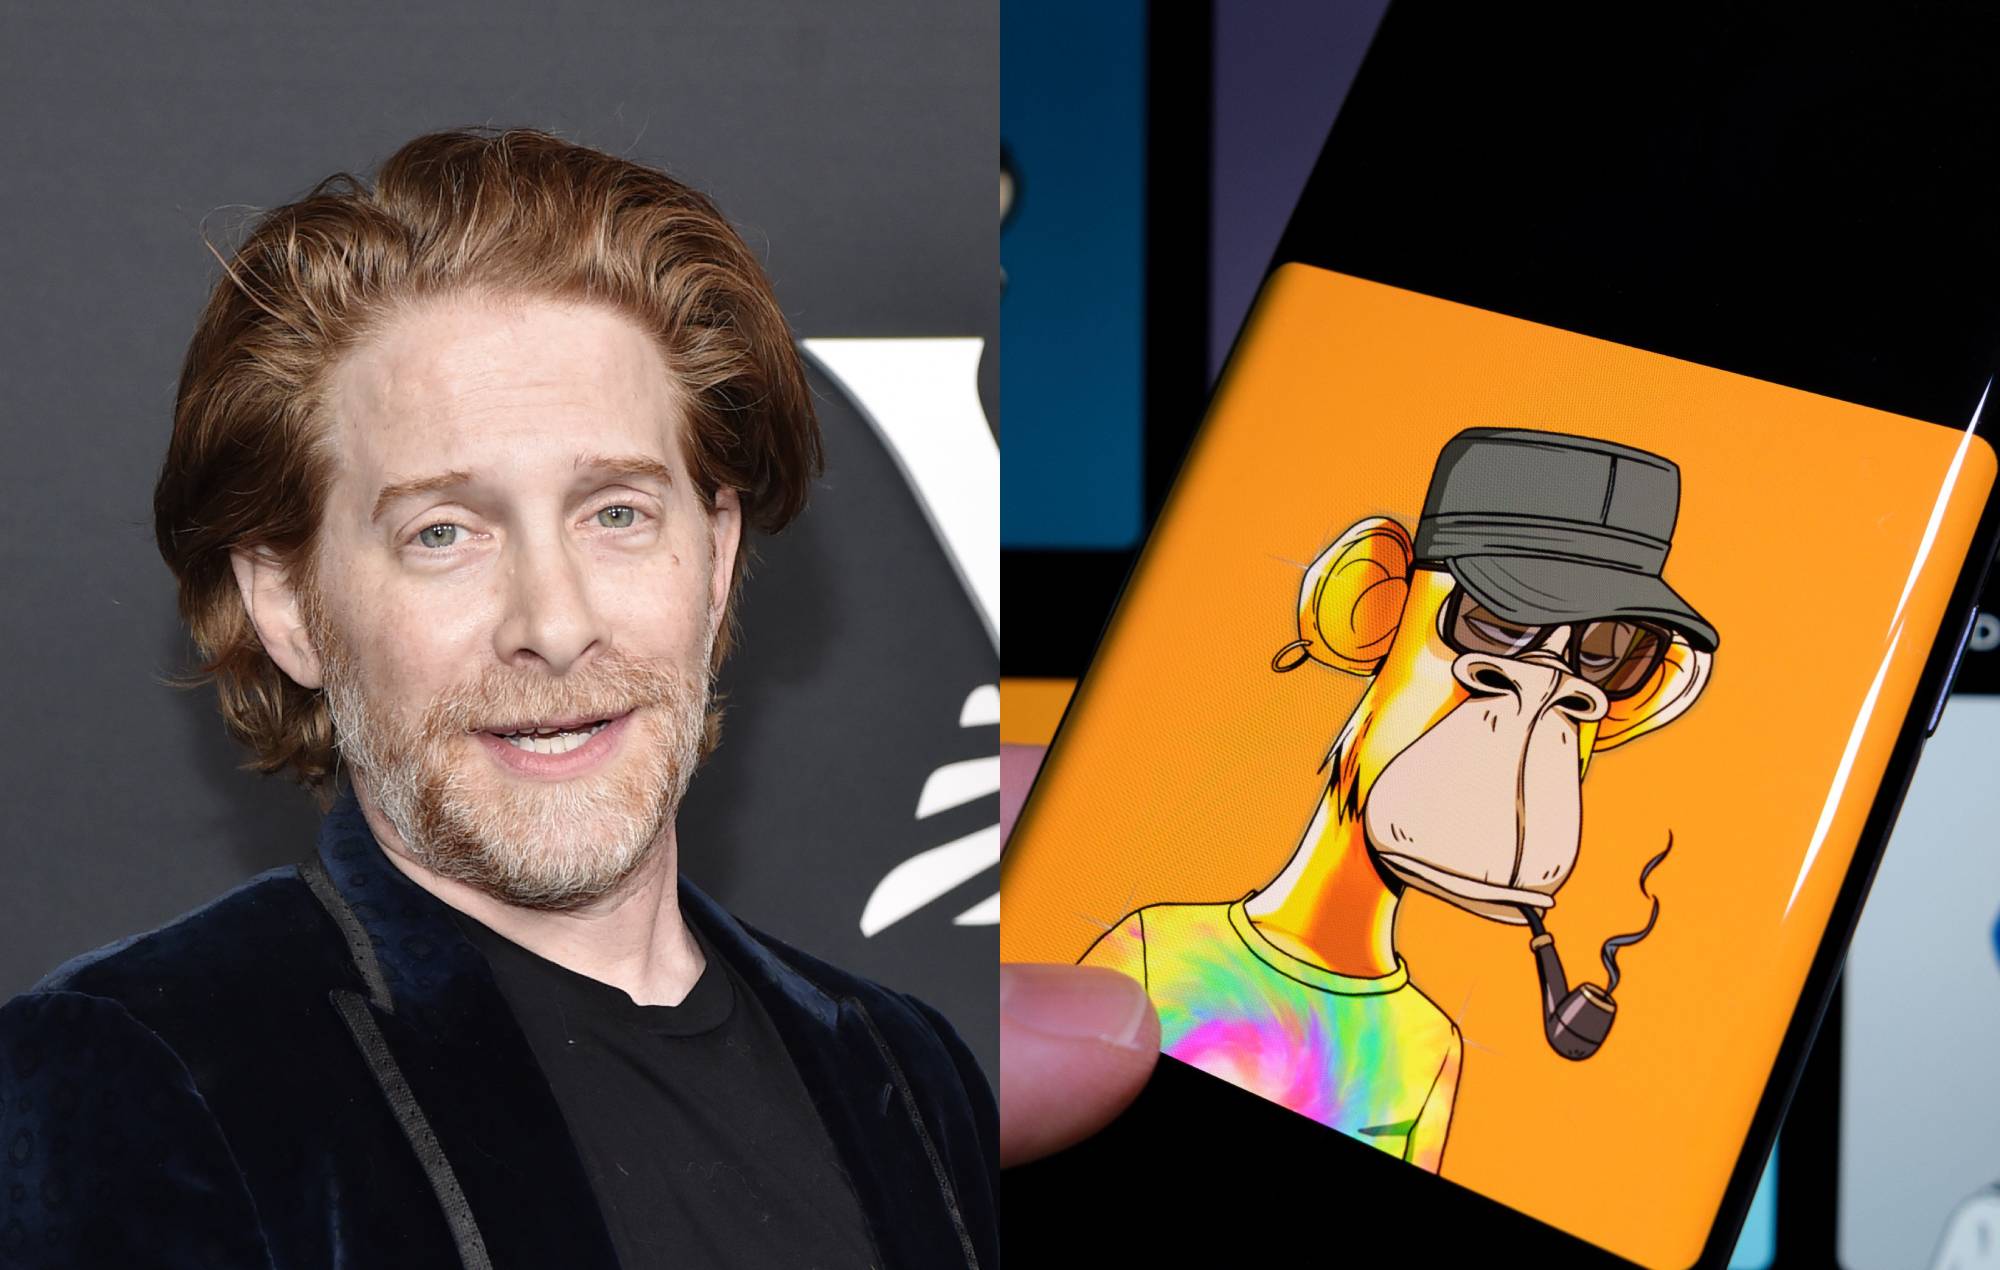 Seth Green appeals for return of Bored Ape NFT due to star in his new show